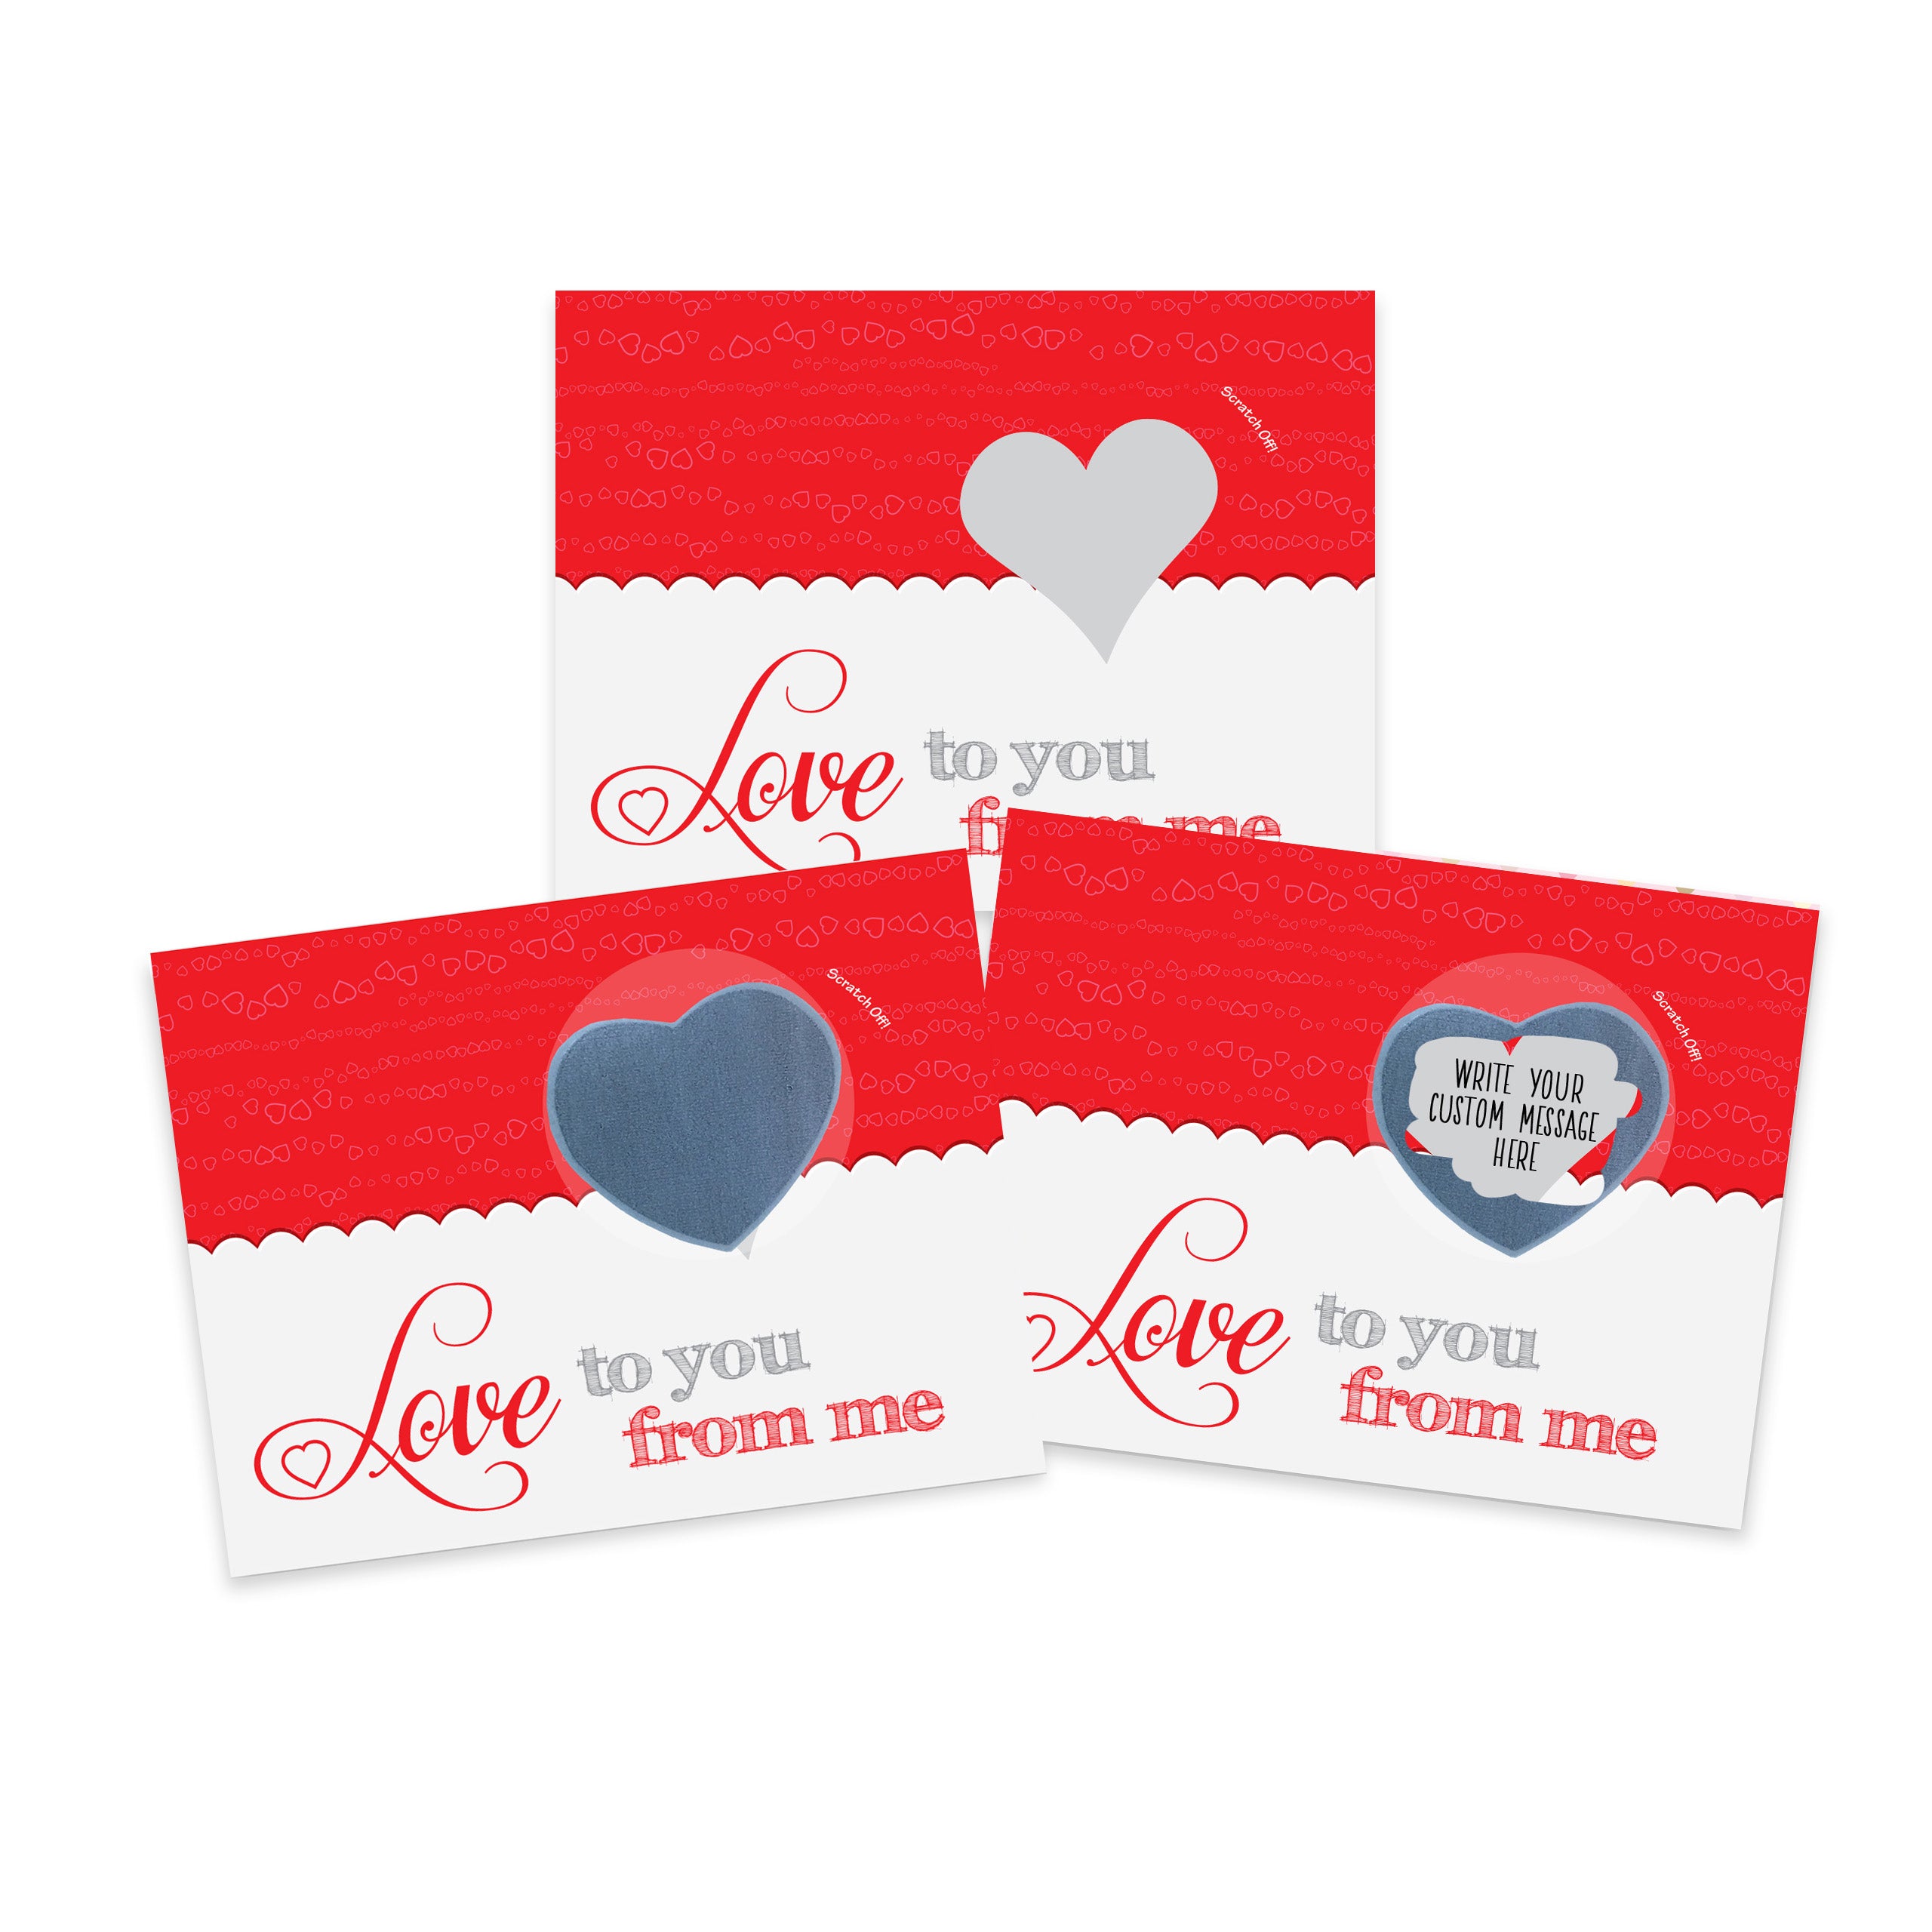 Make Your Own Scratch Off Love Notes Kit of 25 for Valentine's Day